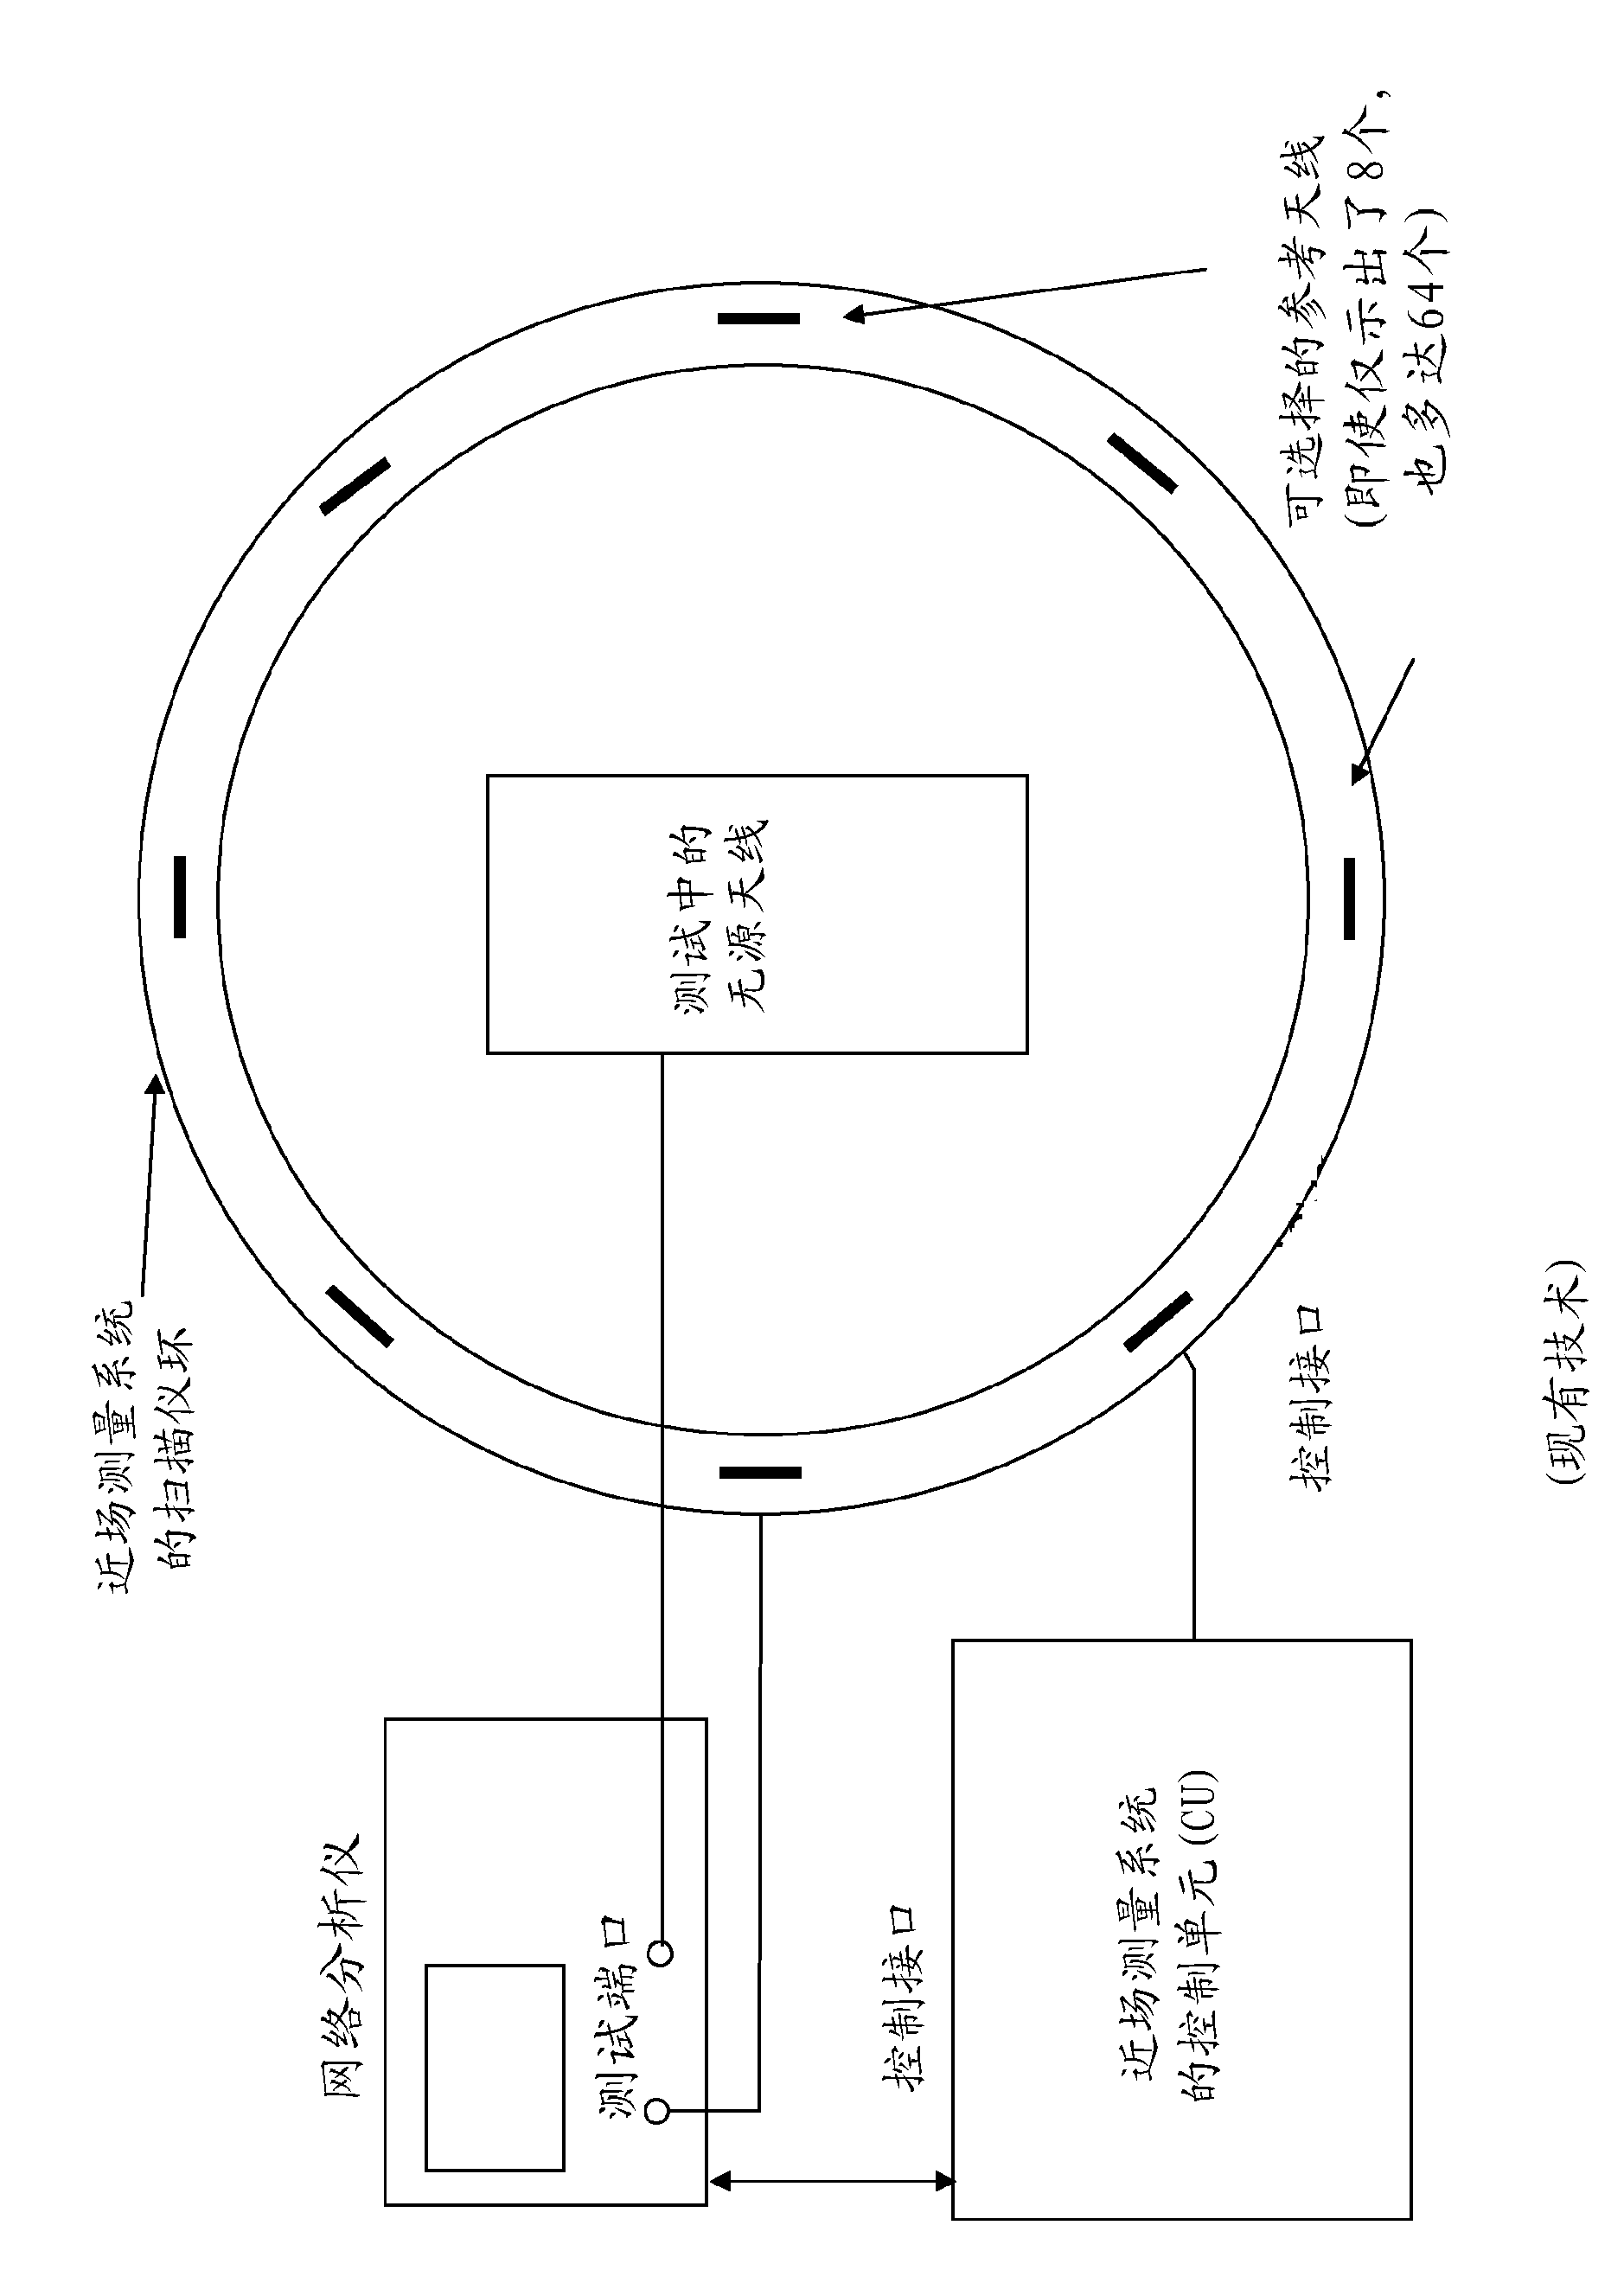 Apparatus for measuring a radiation pattern of an active antenna arrangement